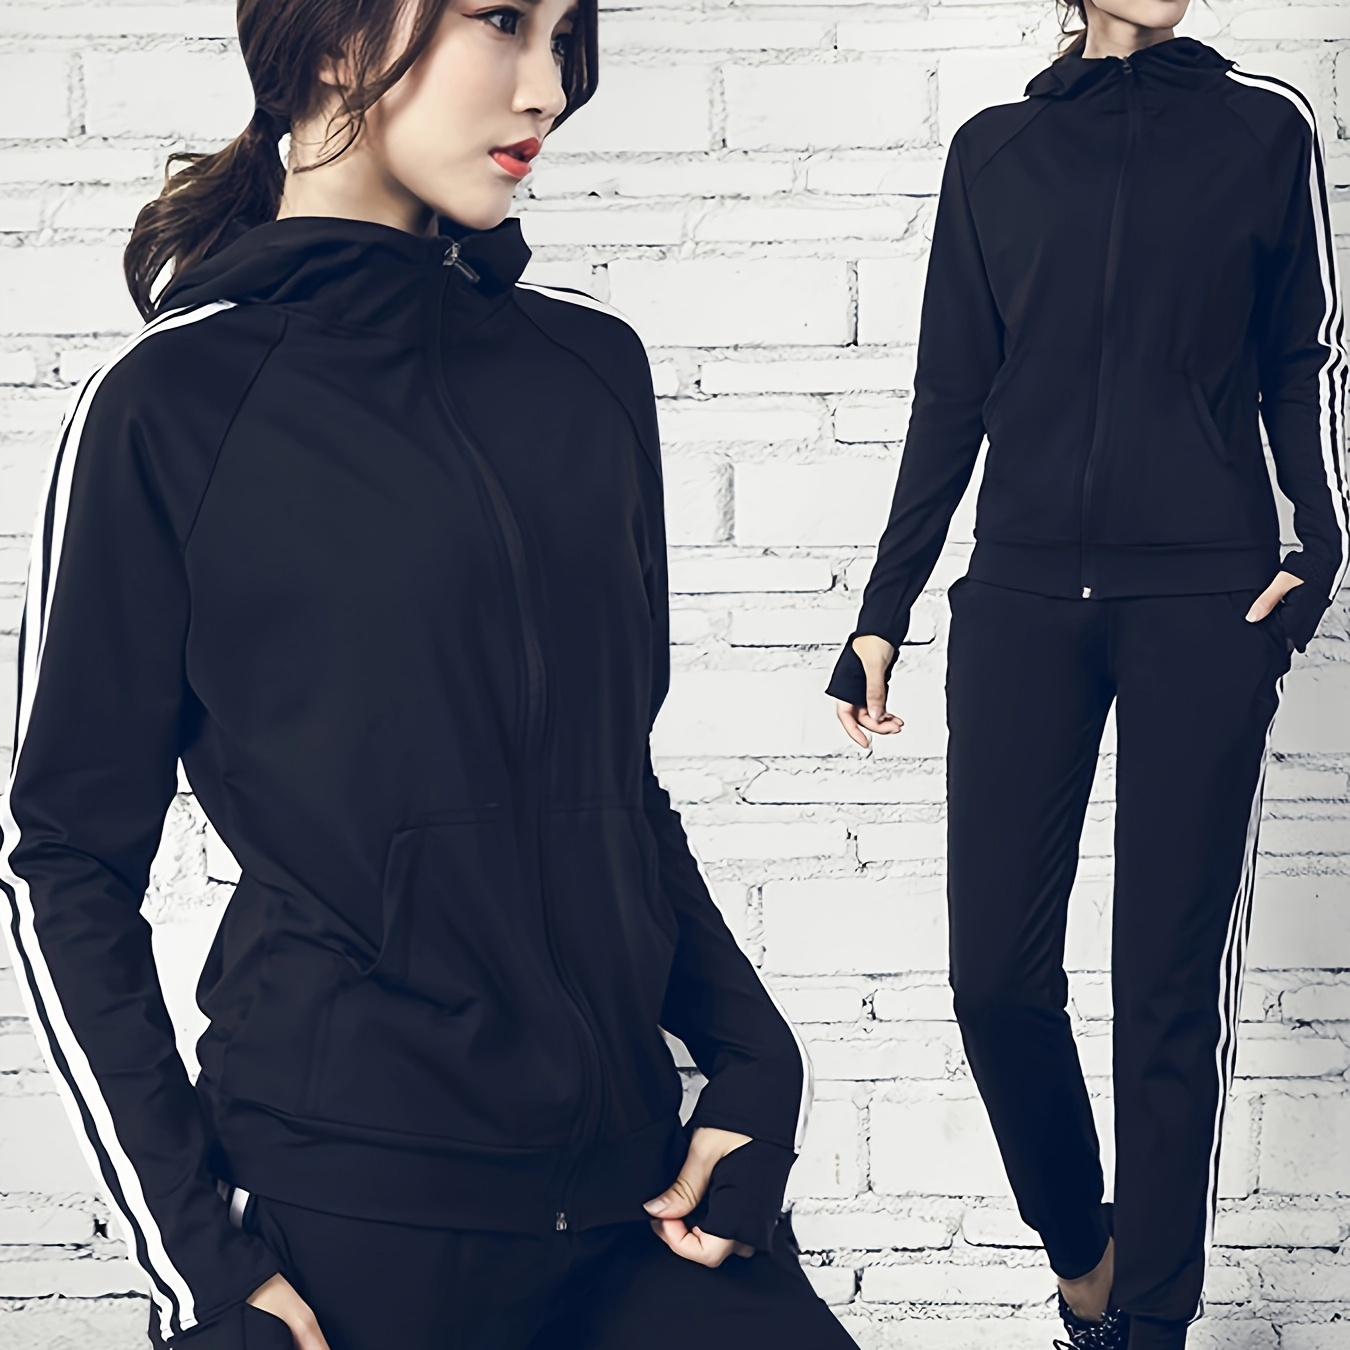 

A Set Of Women's Sportswear For Morning Jogging, Consisting Of A Top And Bottom, Including A Shirt And A Quick-drying Hooded Jacket For Fitness.